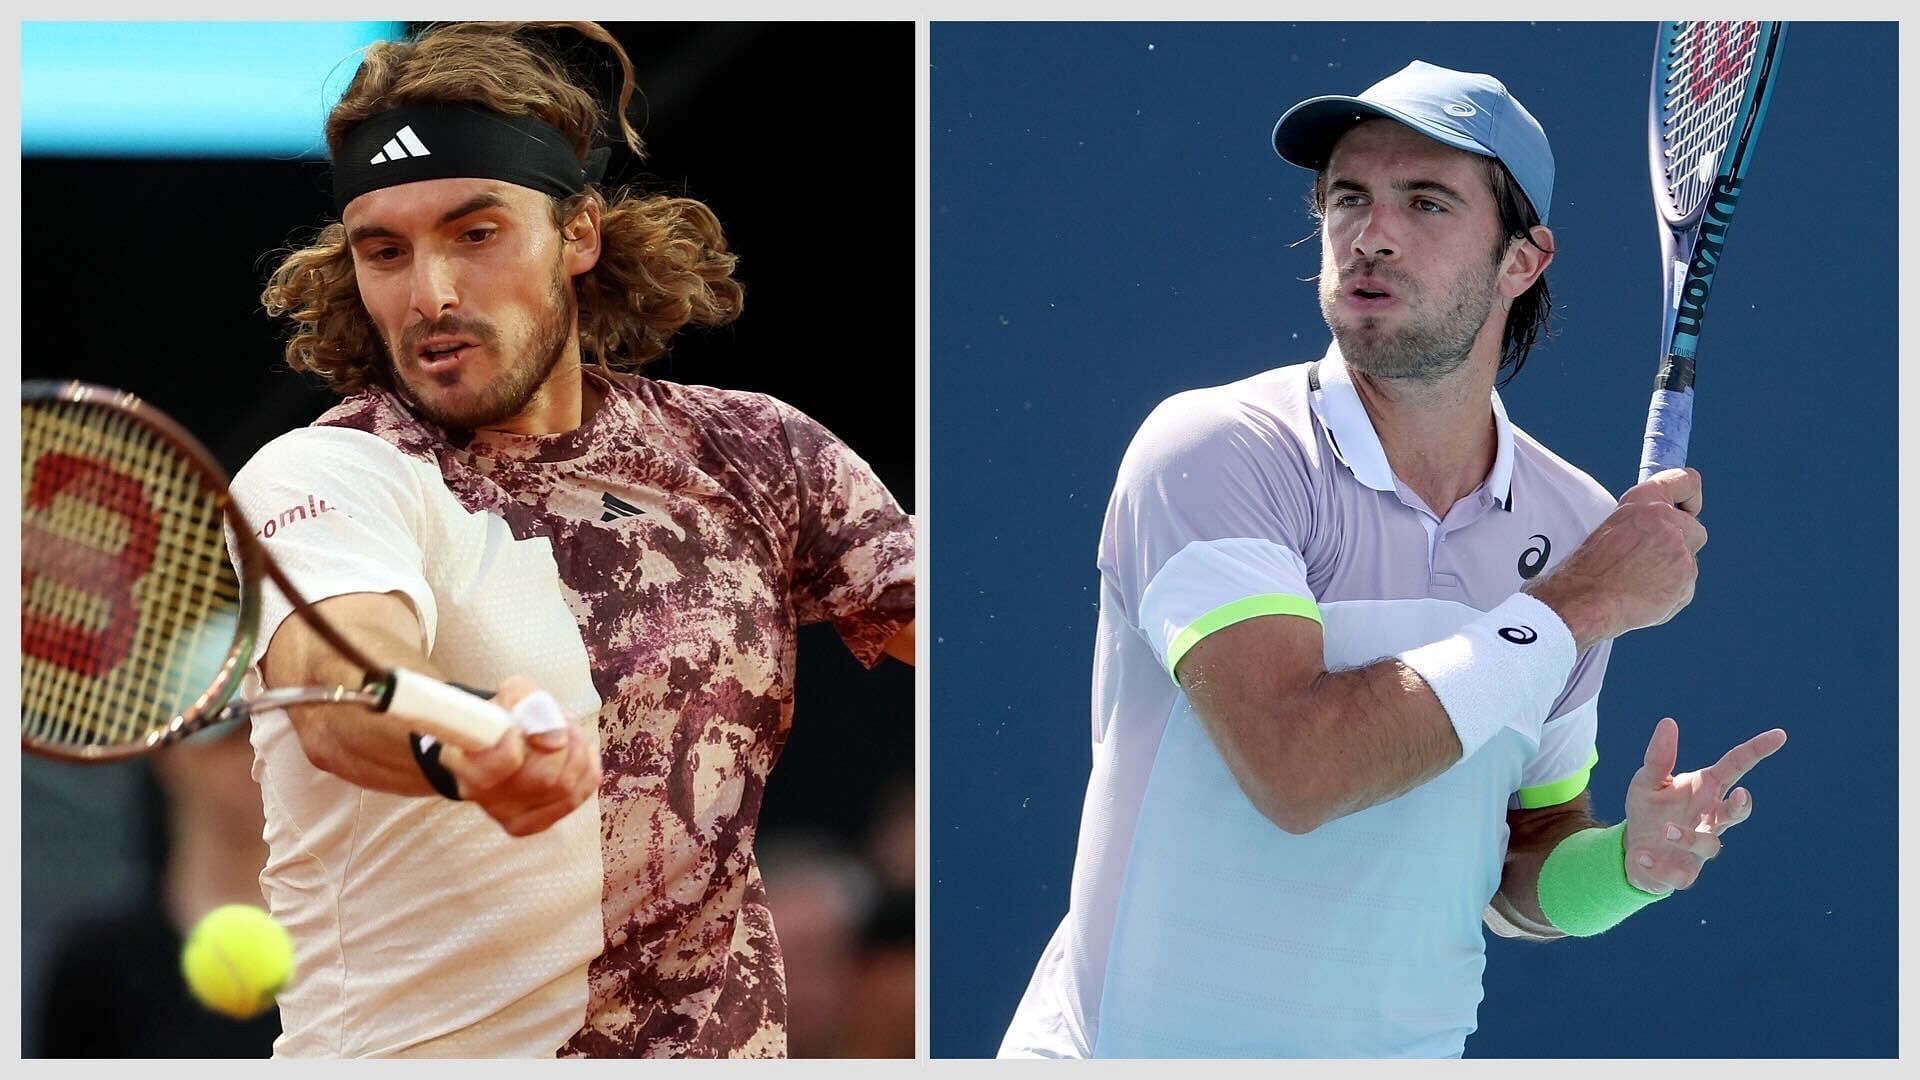 Stefanos Tsitsipas vs Borna Coric is one of the semifinals at the Los Cabos Open